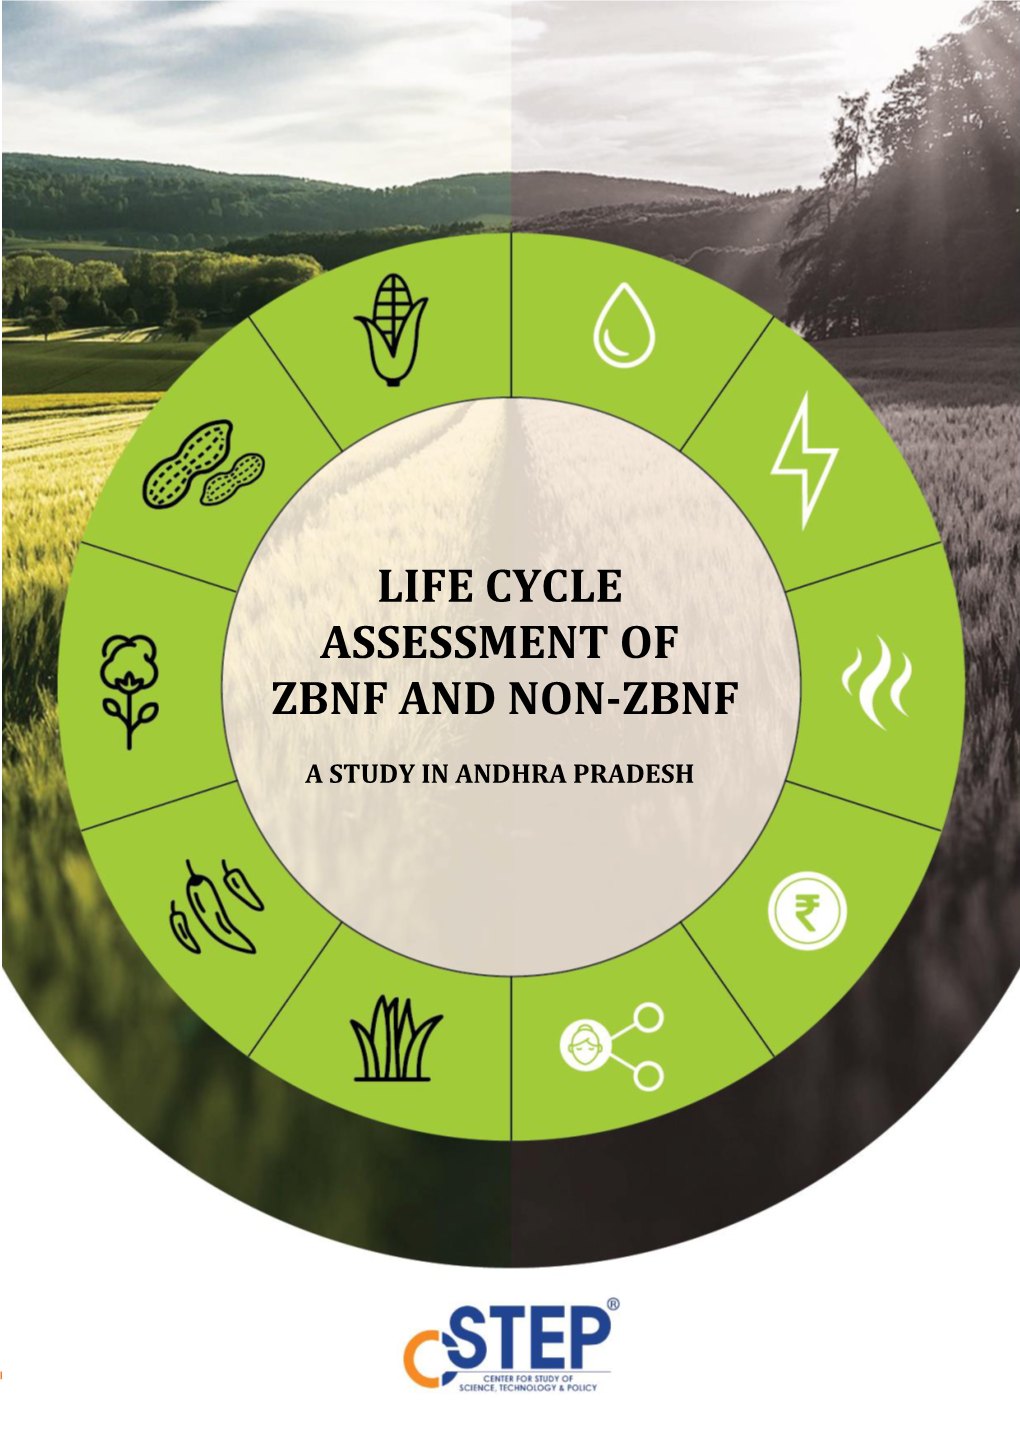 Life Cycle Assessment of Zbnf and Non-Zbnf